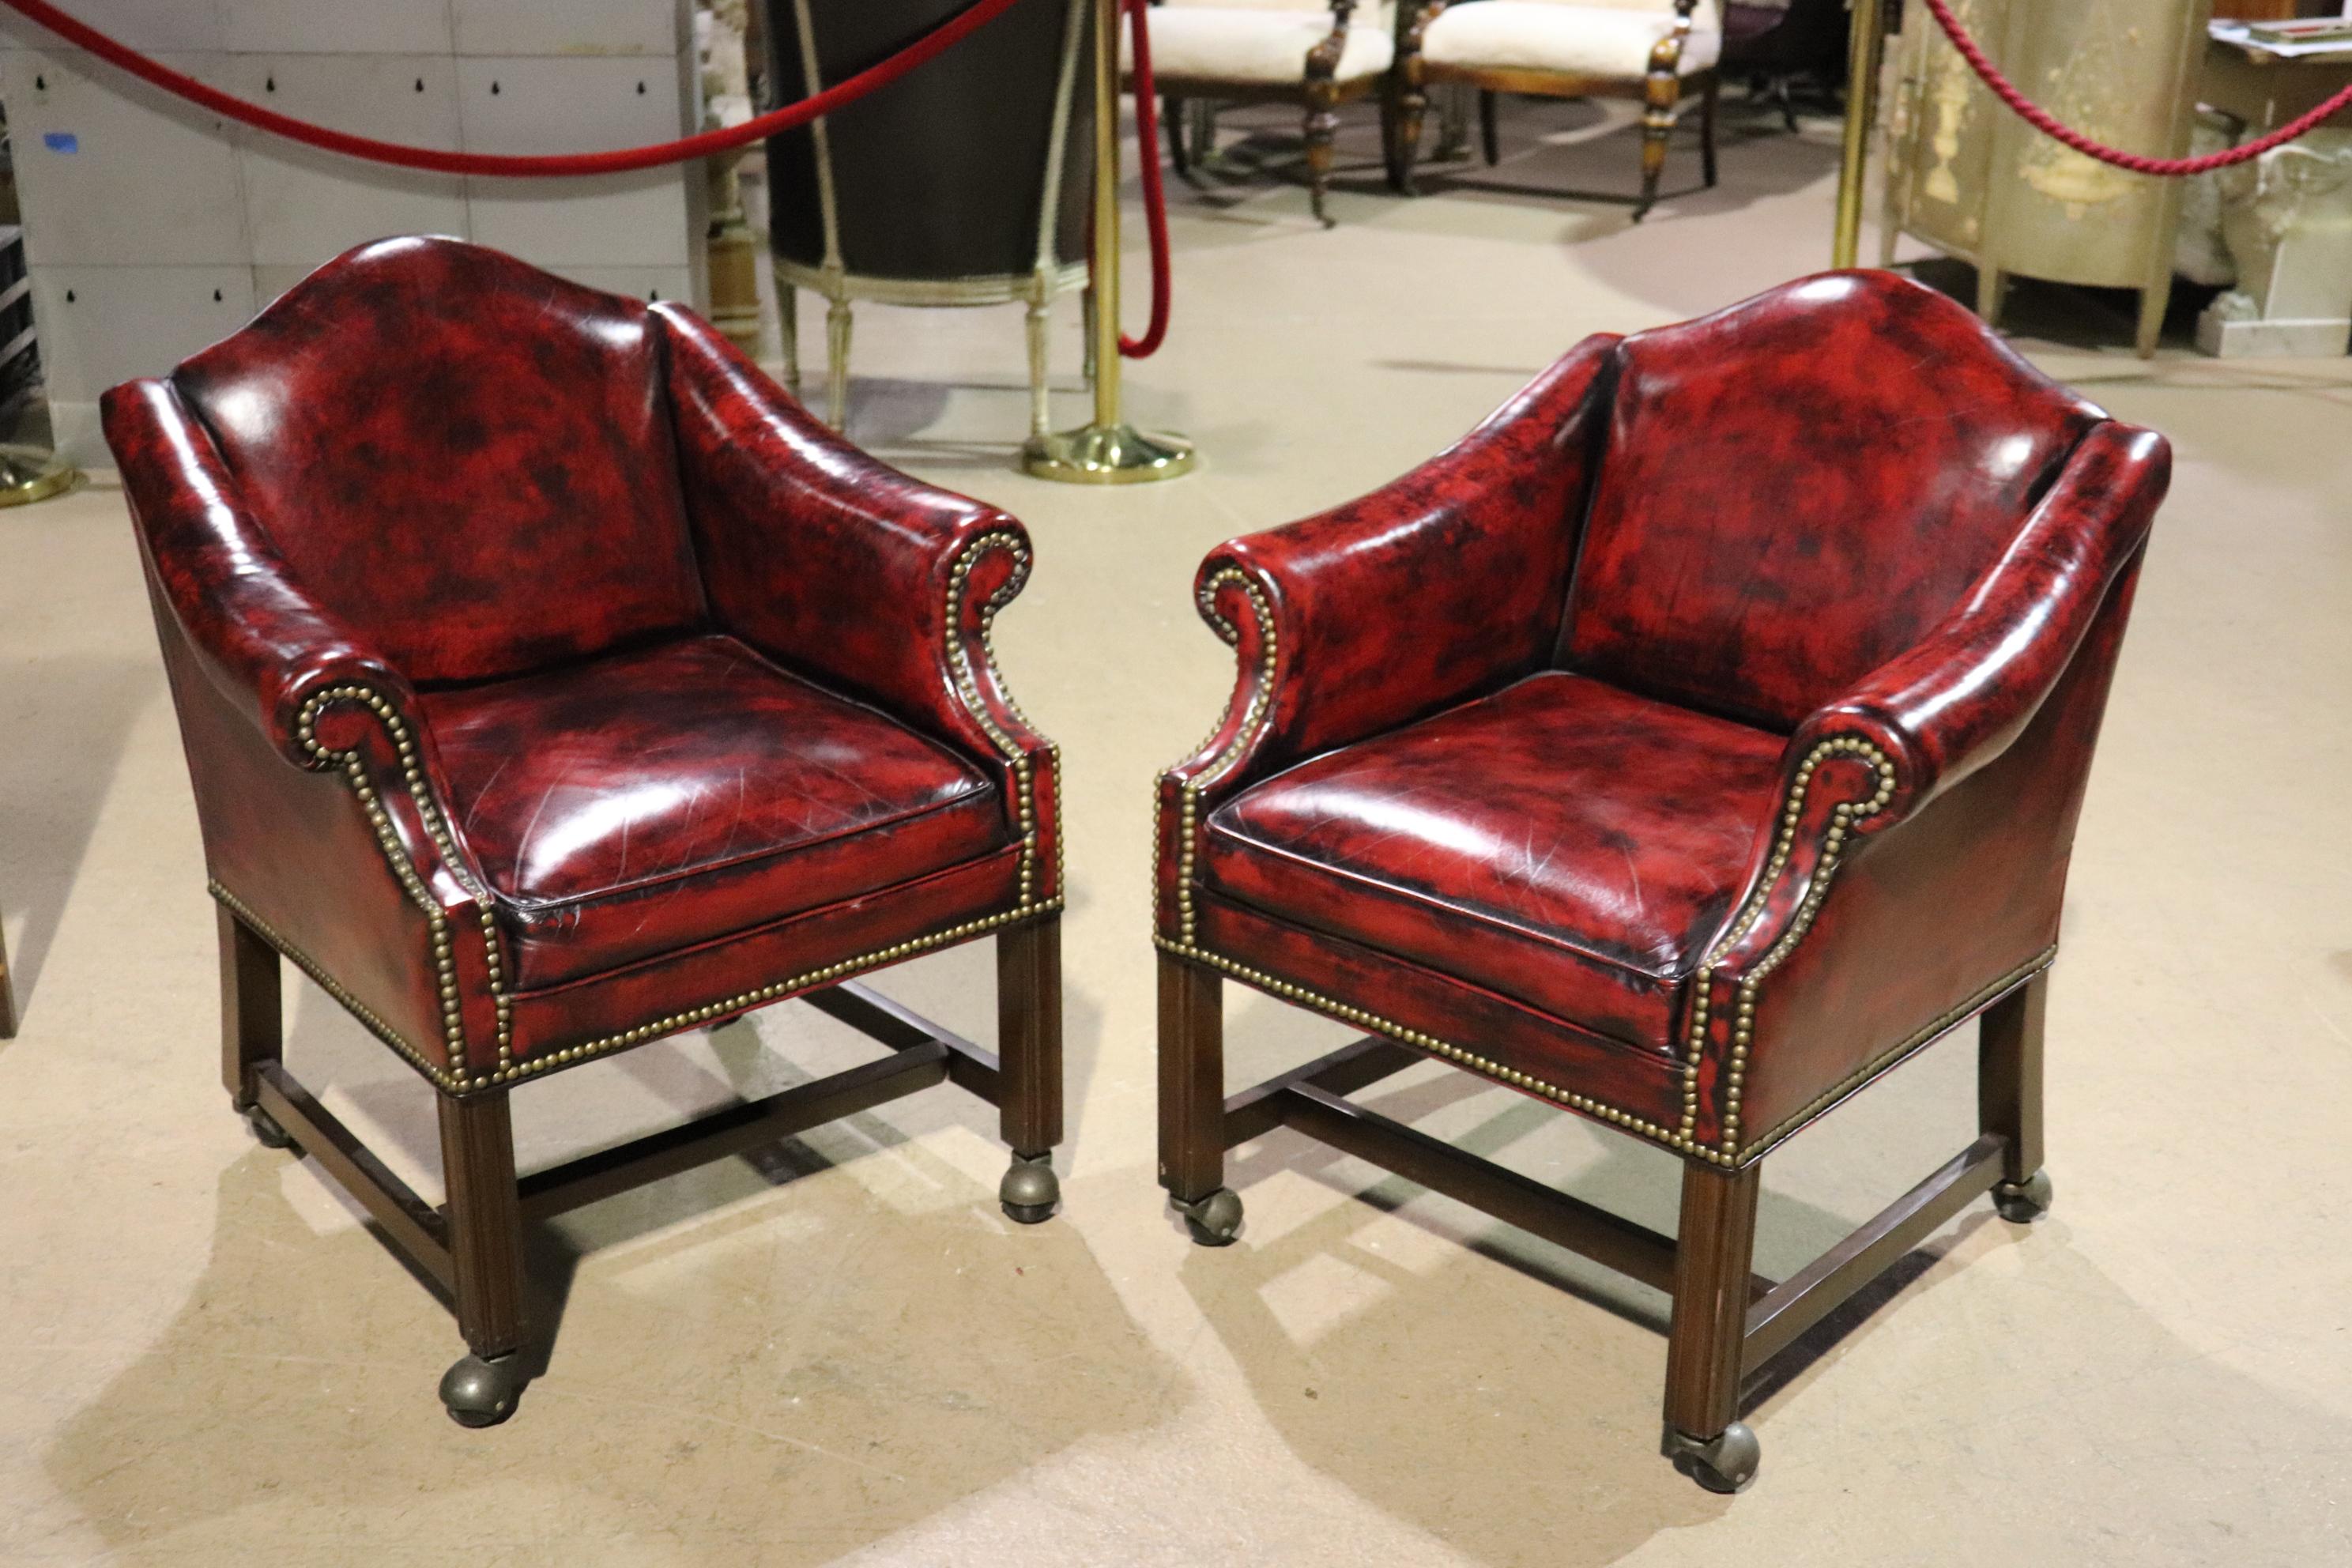 These are sophisticated chairs in a simple way. They are perfect for a law office and in very good original 1970s vintage condition. They each measure 34 tall x 27 wide x 28 deep and the seat height is 19 inches tall. The leather is in very very